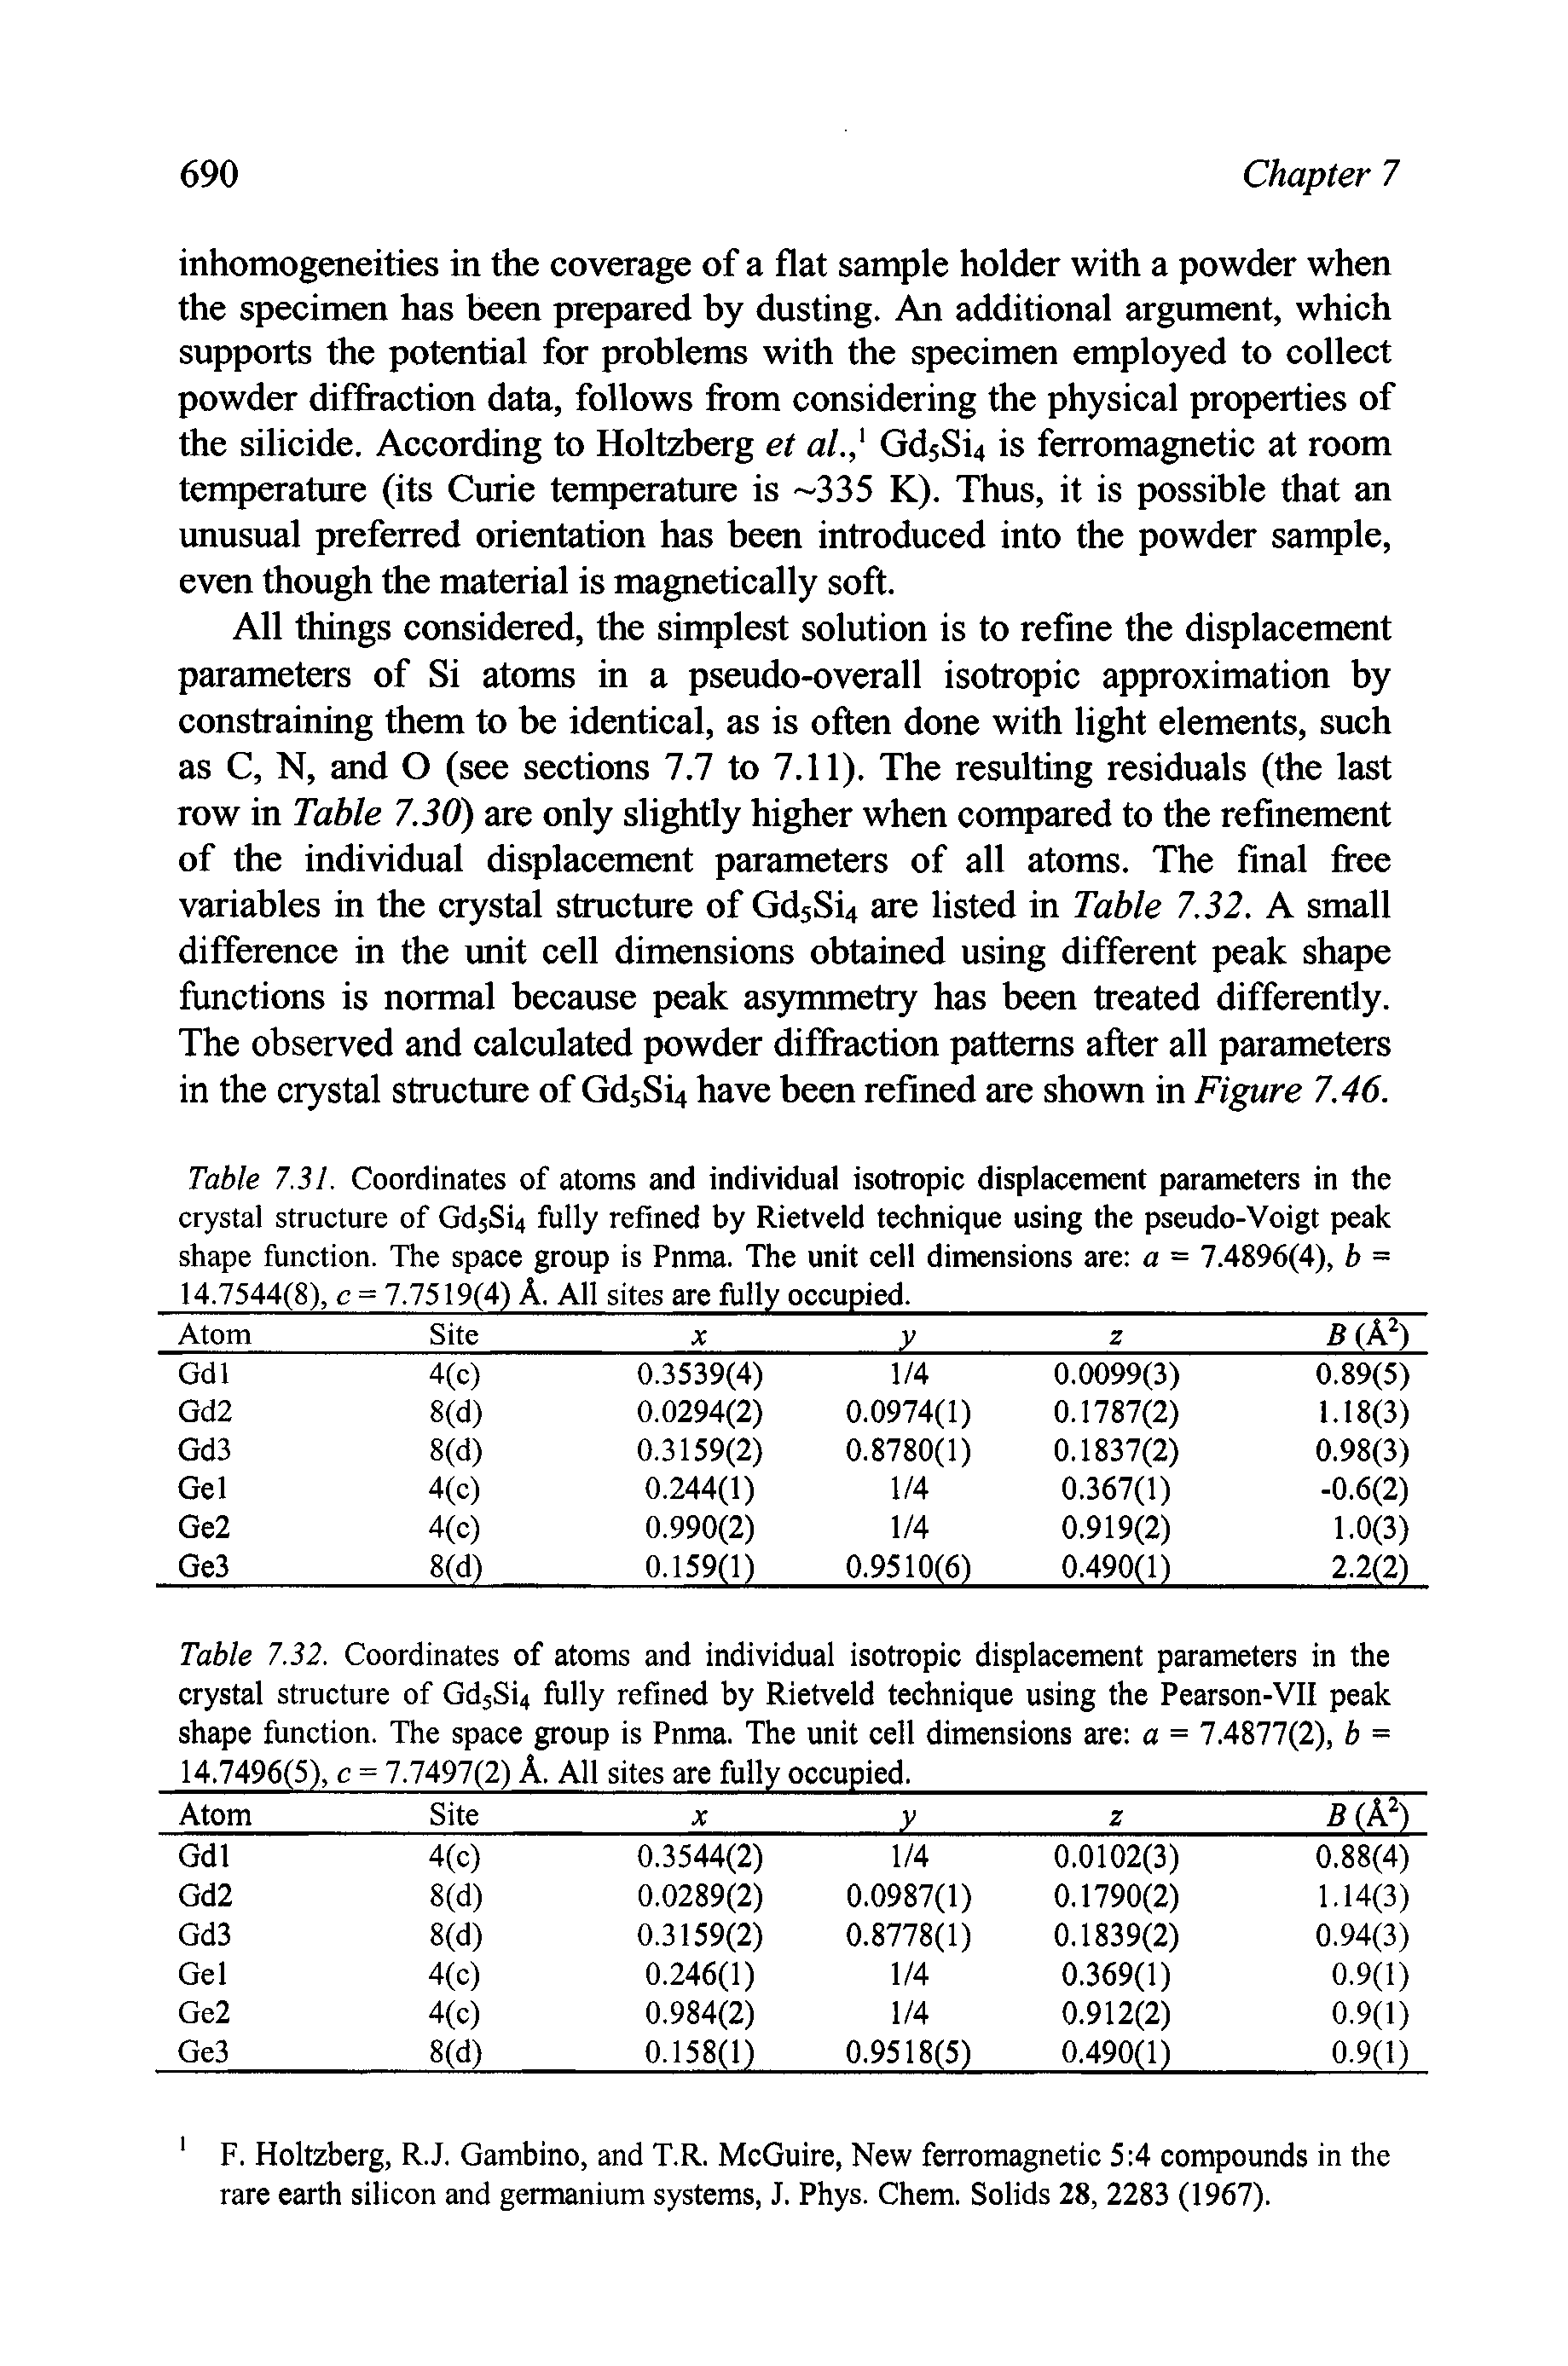 Table 7.31. Coordinates of atoms and individual isotropic displacement parameters in the crystal structure of Gd5Si4 fully refined by Rietveld technique using the pseudo-Voigt peak shape function. The space group is Pnma. The unit cell dimensions are a = 7.4896(4), b = 14.7544(8), c = 7.7519(4) A. All sites are fully occupied. ...